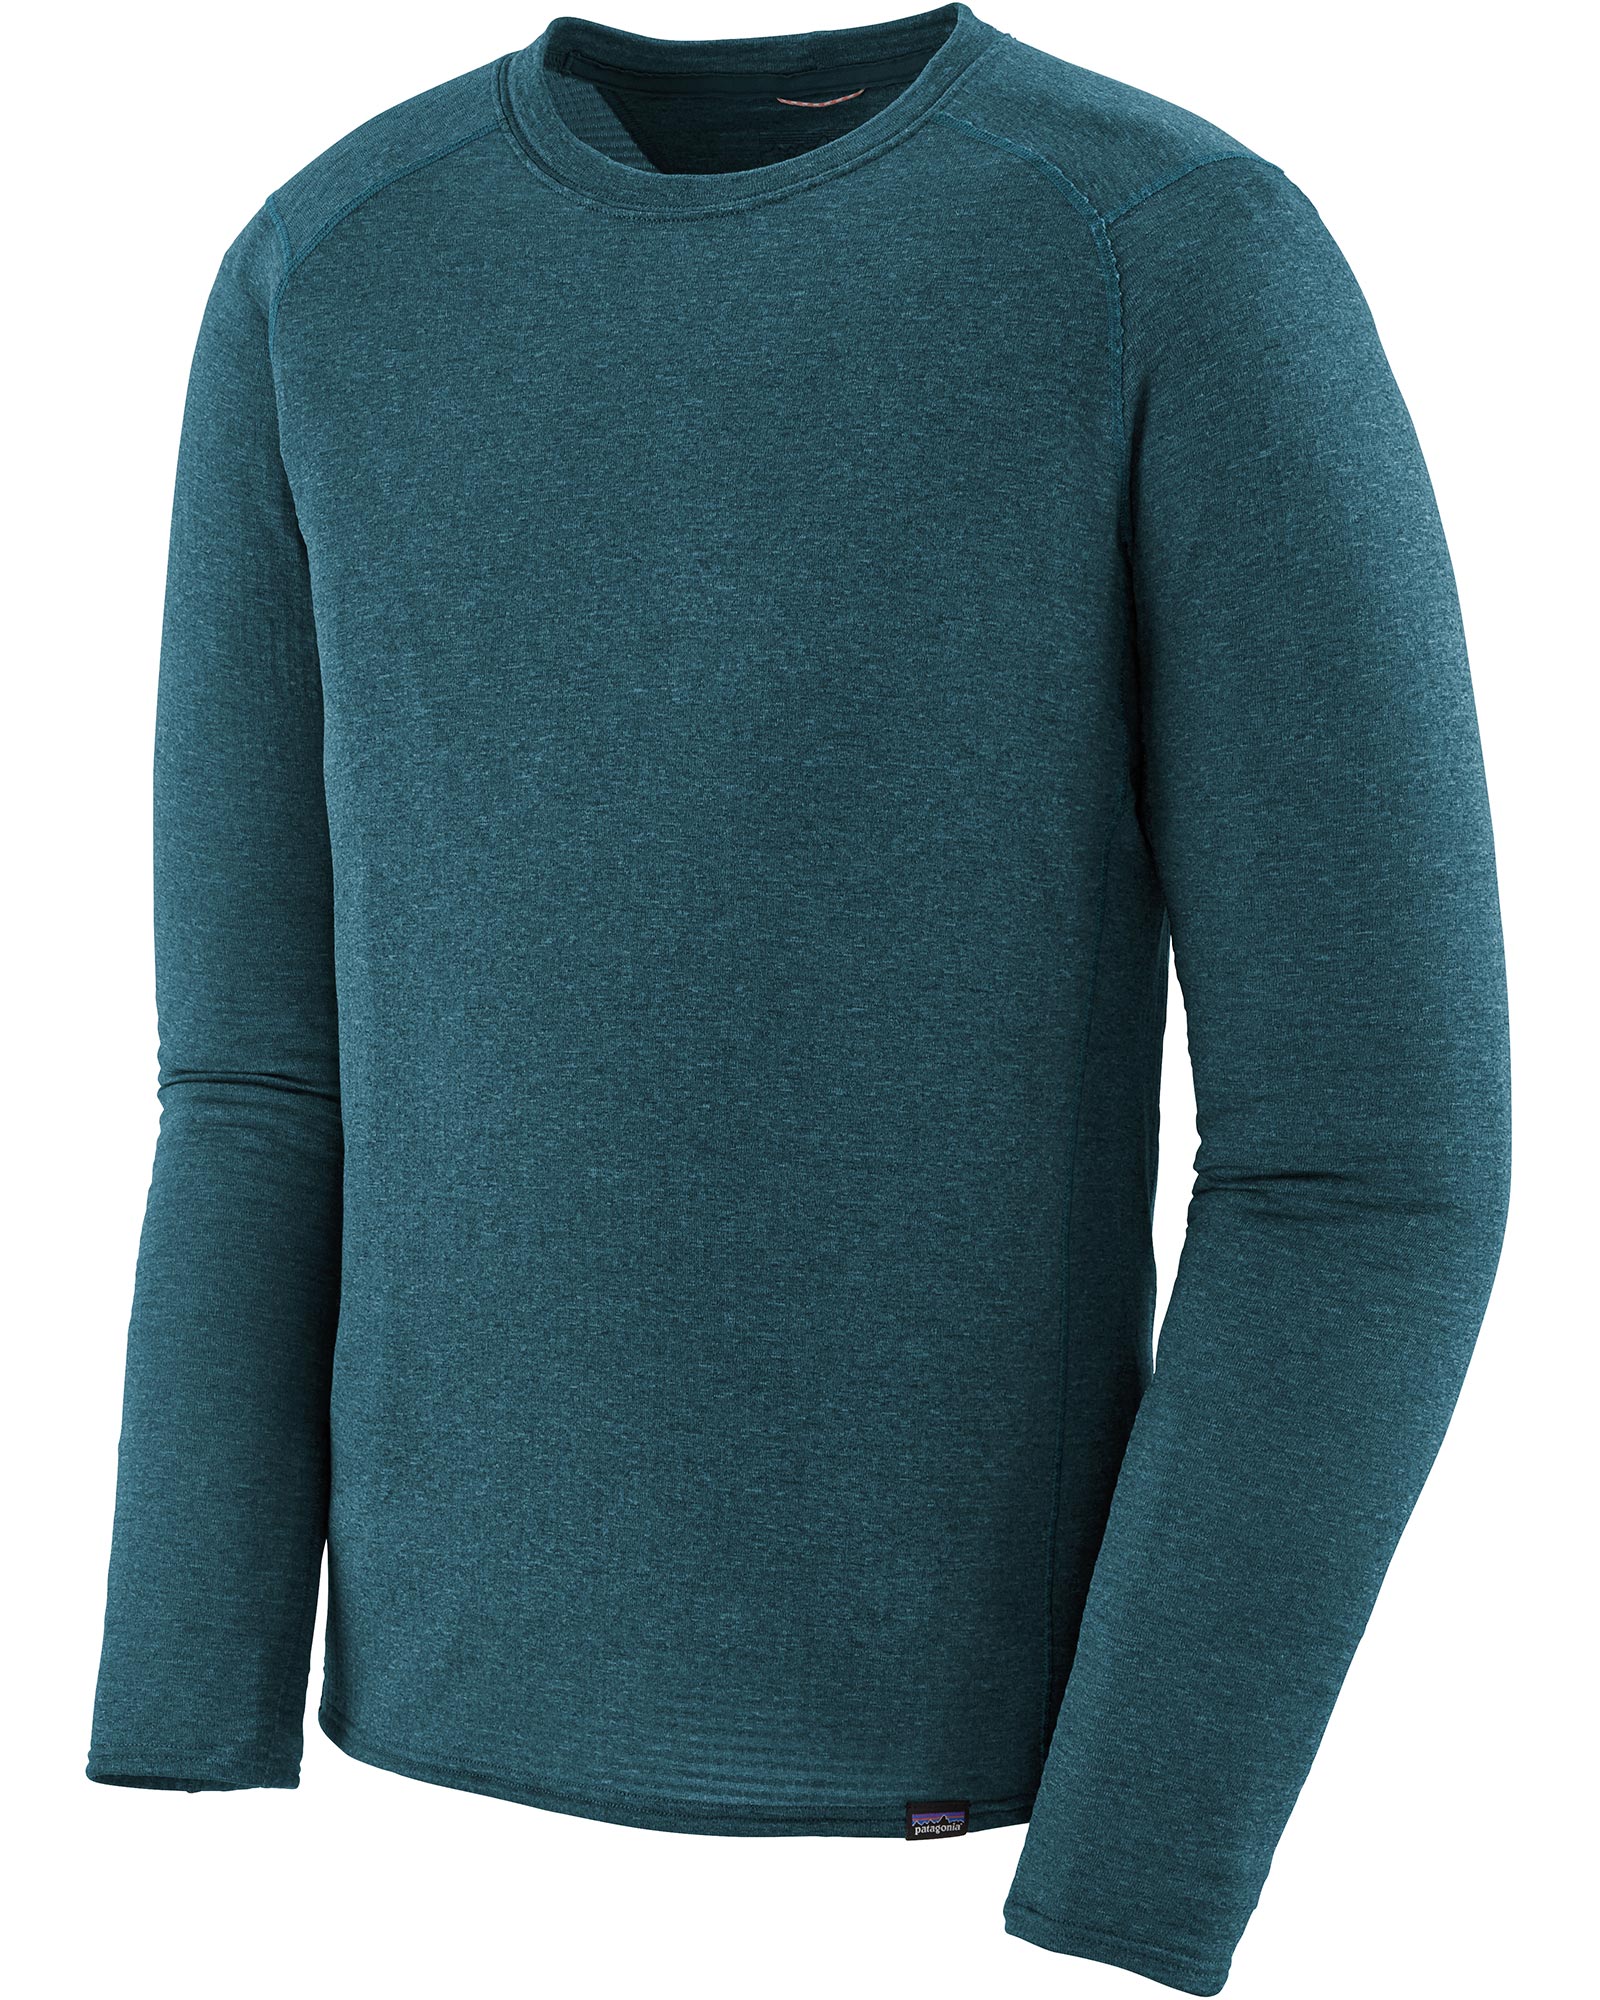 Patagonia Capilene Men’s Thermal Weight Crew Neck - Crater Blue L